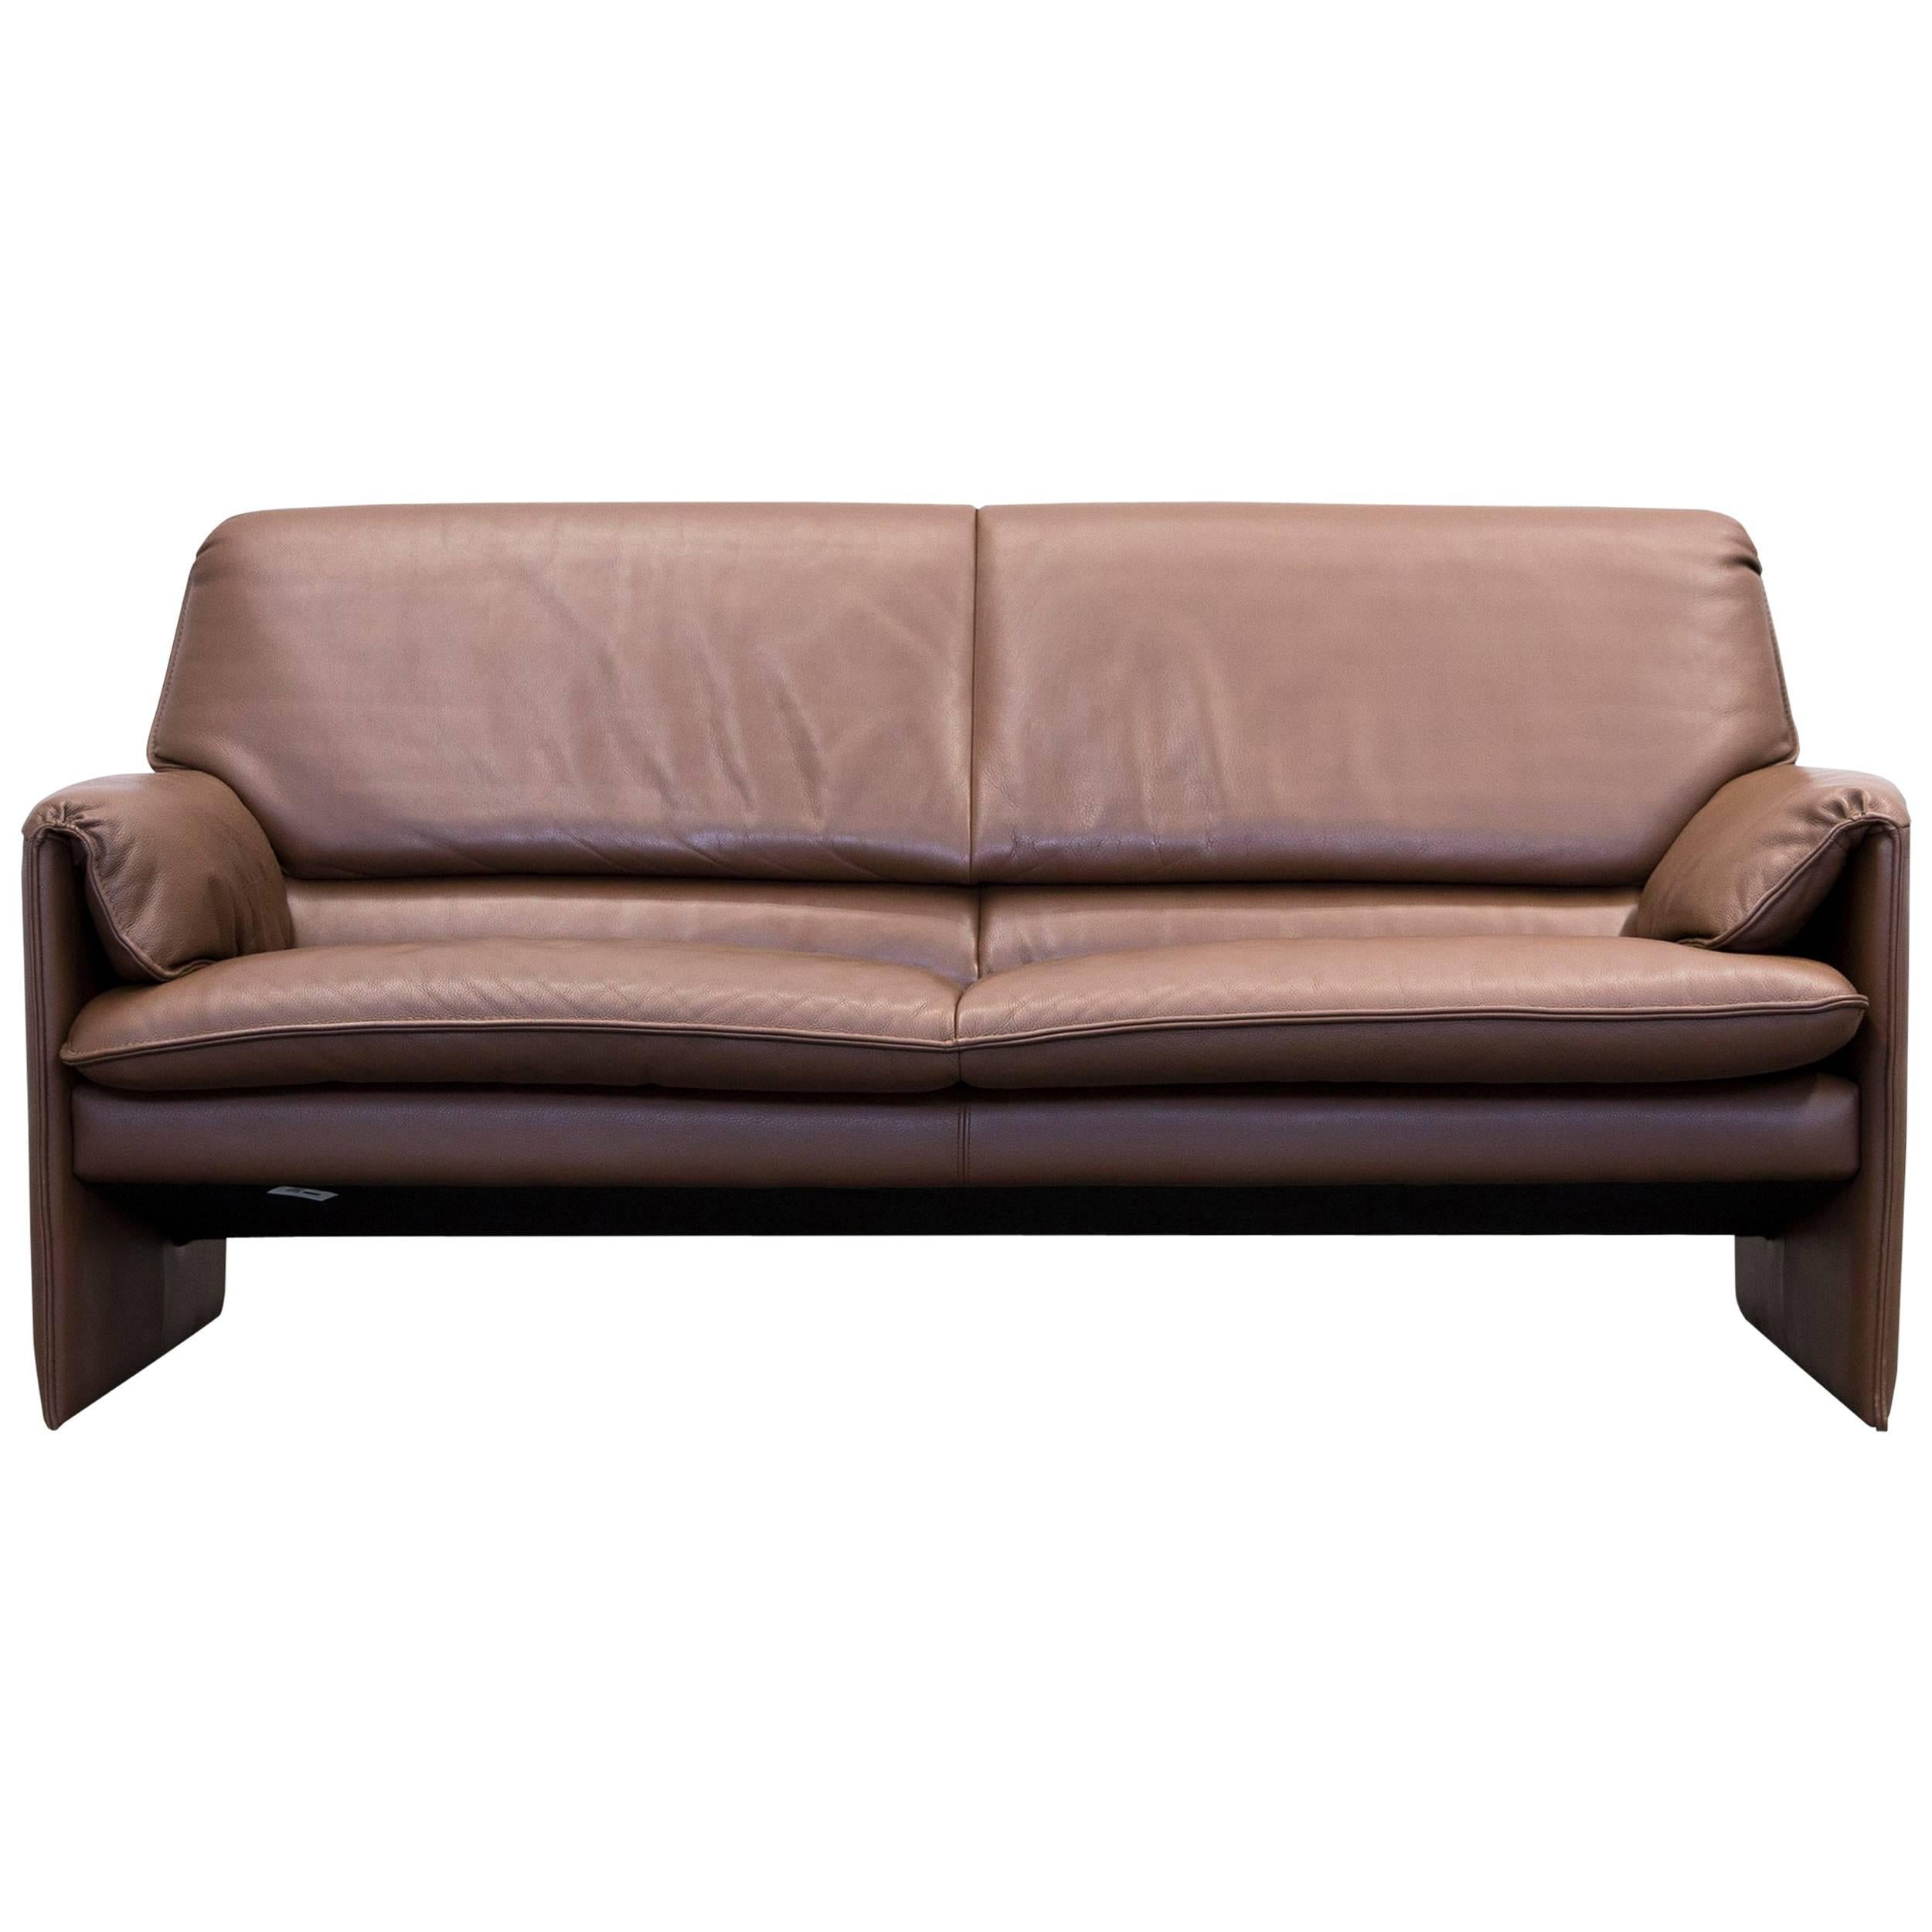 Leolux Bora Designer Sofa Leather Brown Two-Seat Couch Modern